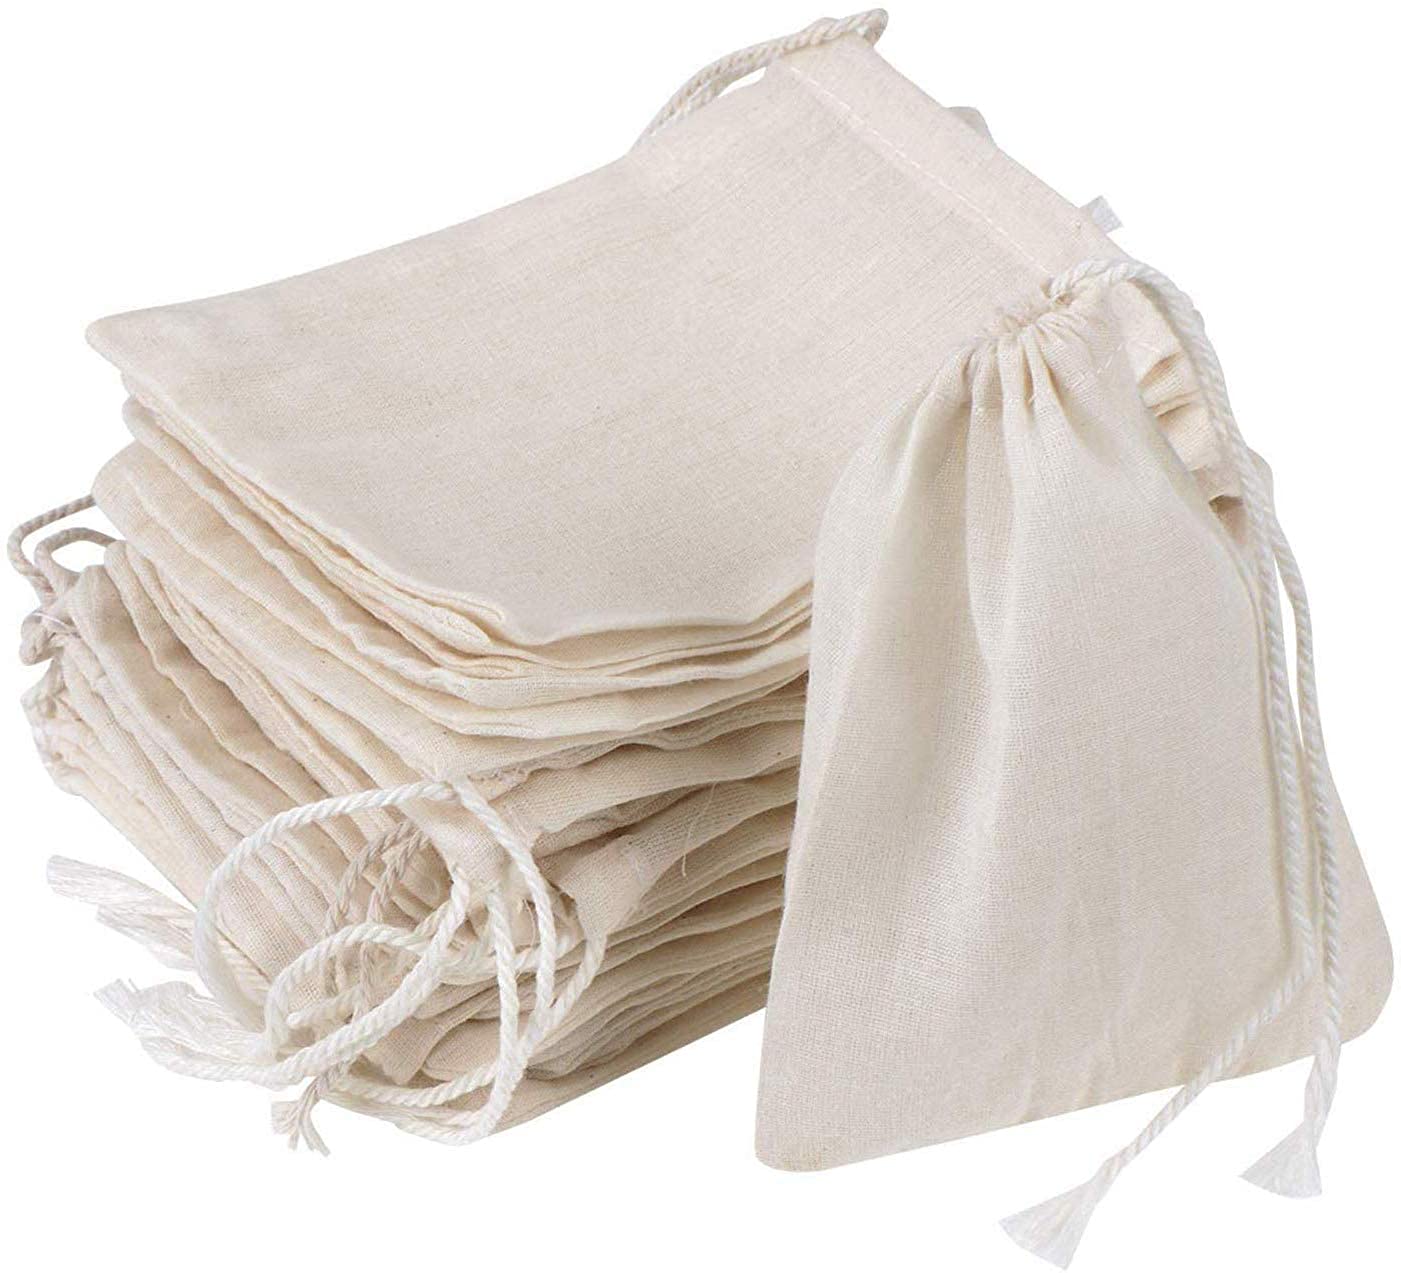 ‎NJ Drawstring Muslin Bag,Coin Pouch,Herb Bag,Pouch for Wedding Party,Jewellery Bag,Gift wrap Pack Bag, Ring Pouch, Party gift packing,Travel Pouch,Surprise gift pack,Cosmetic Bag (3x5) Inches): 30 Pcs